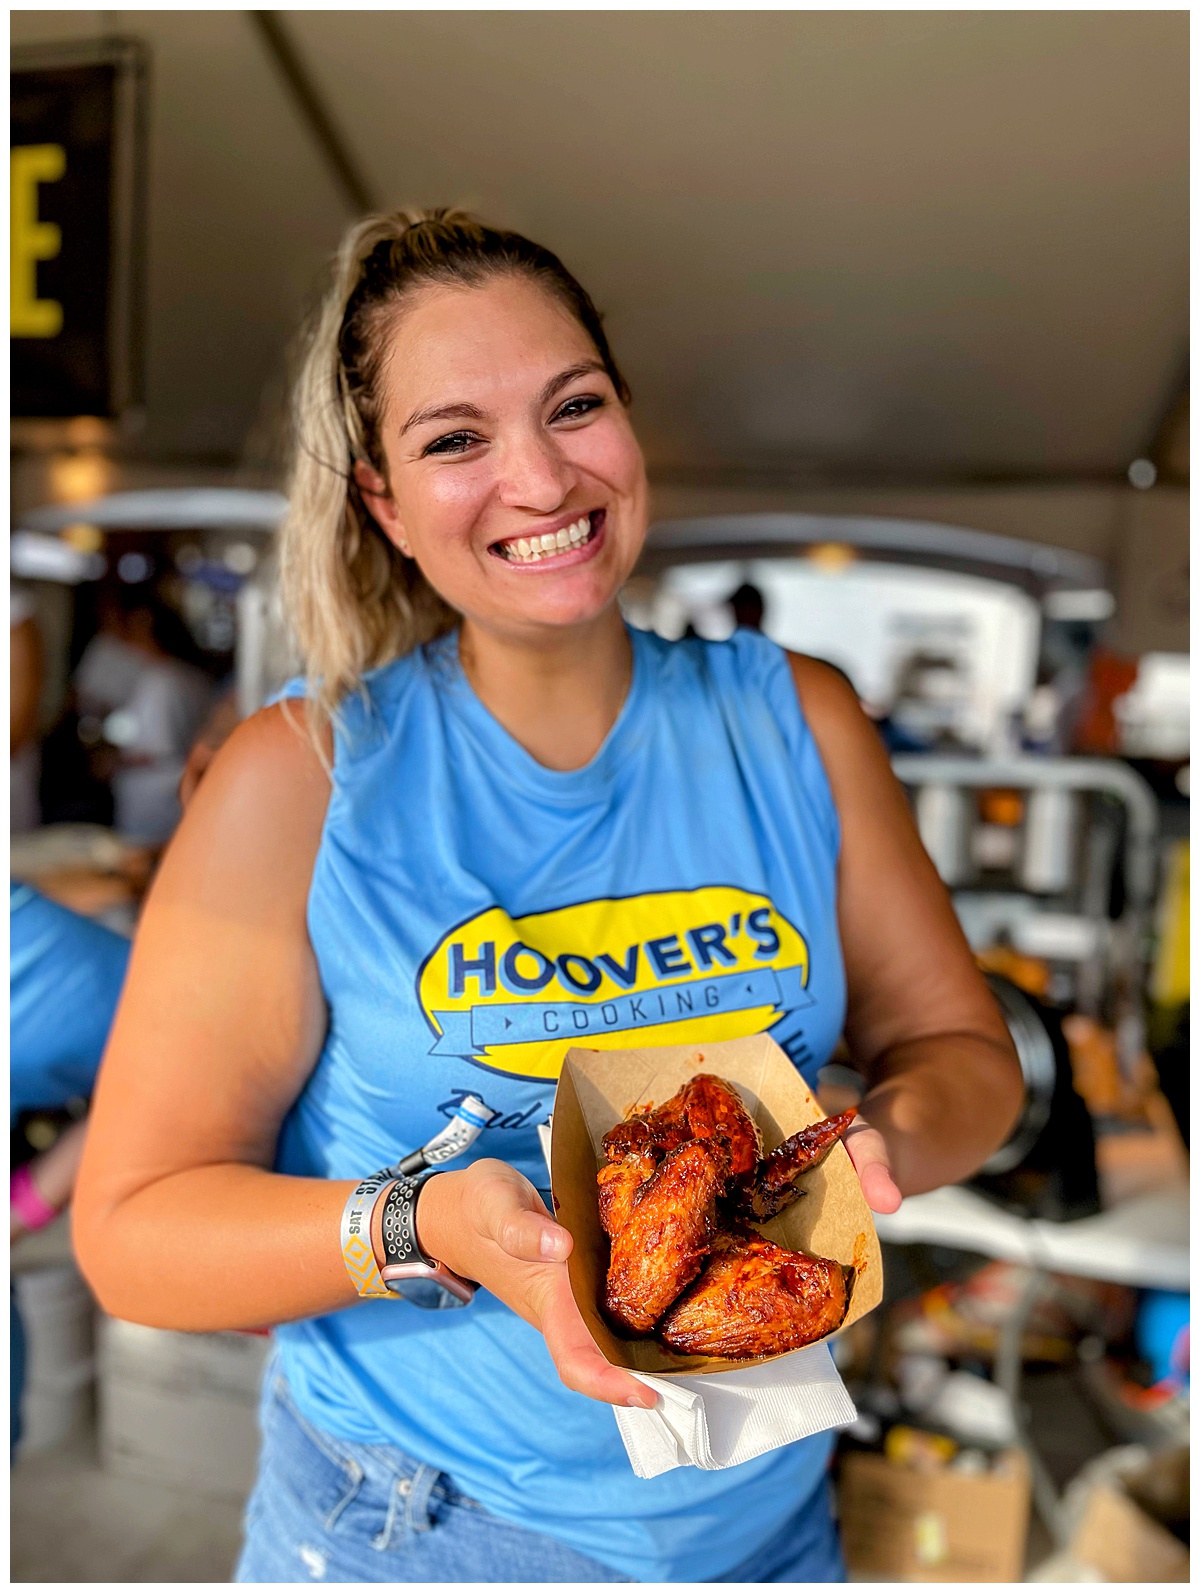 ACL Eats Hoover's Cooking smoked wings